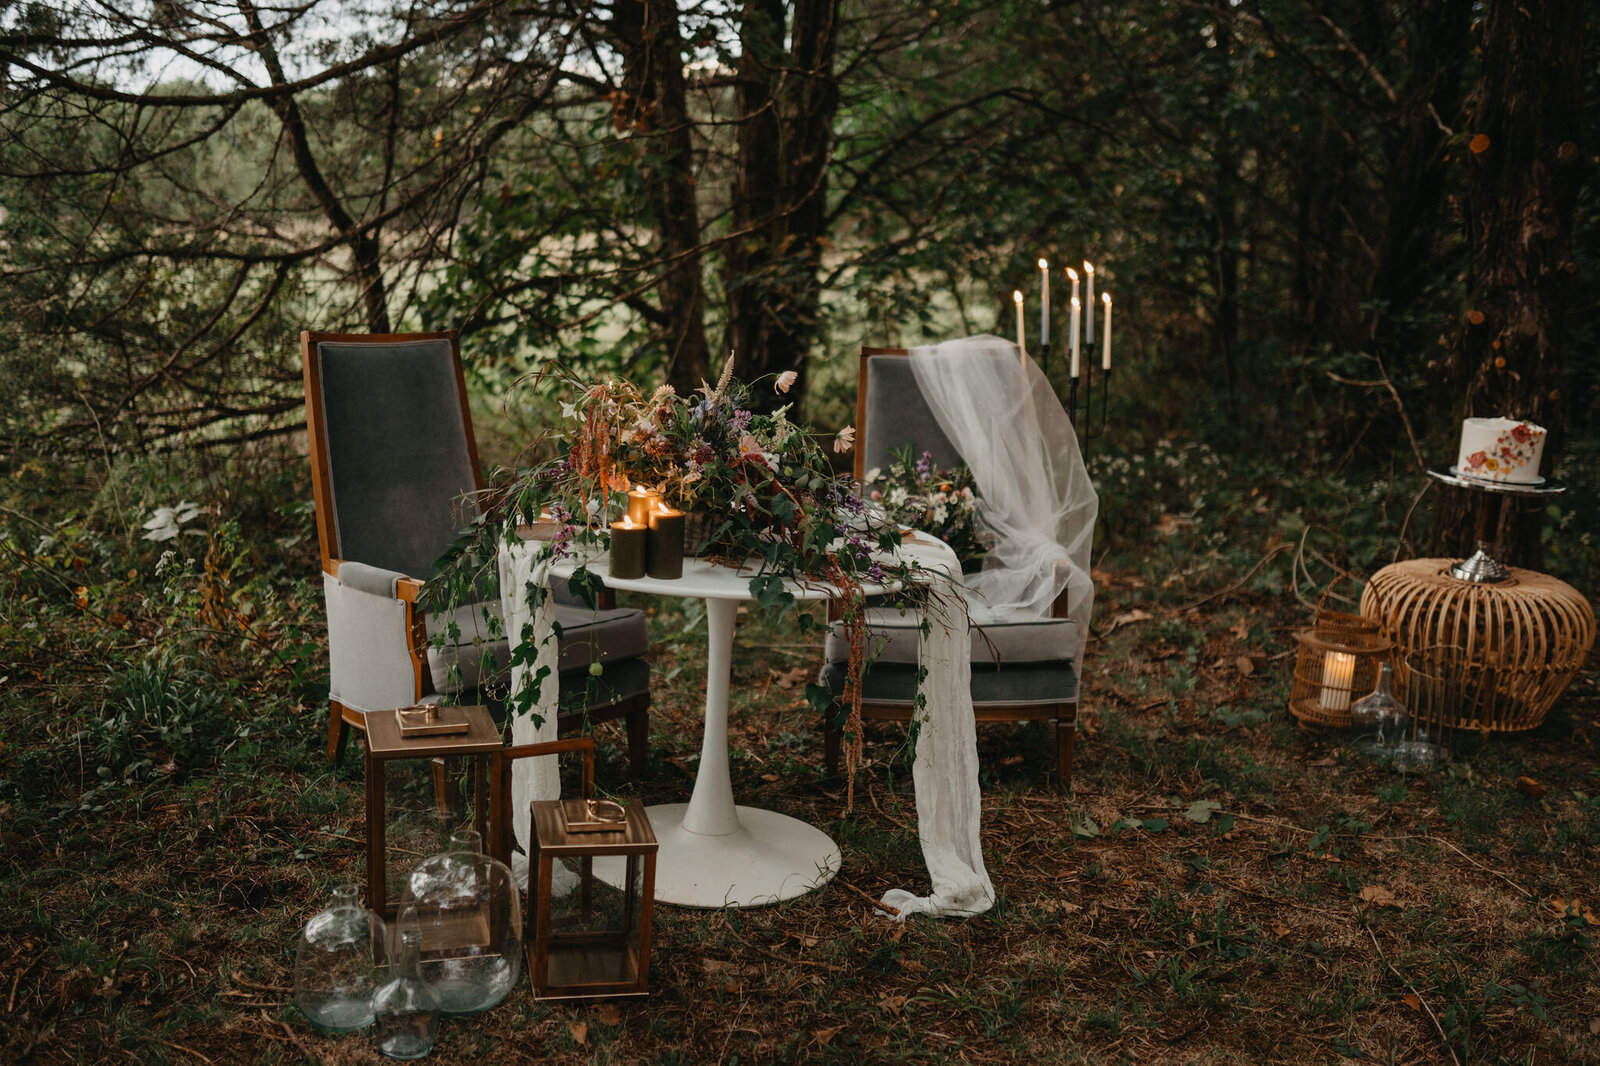 Sweetheart table for an outdoor wedding in the woods